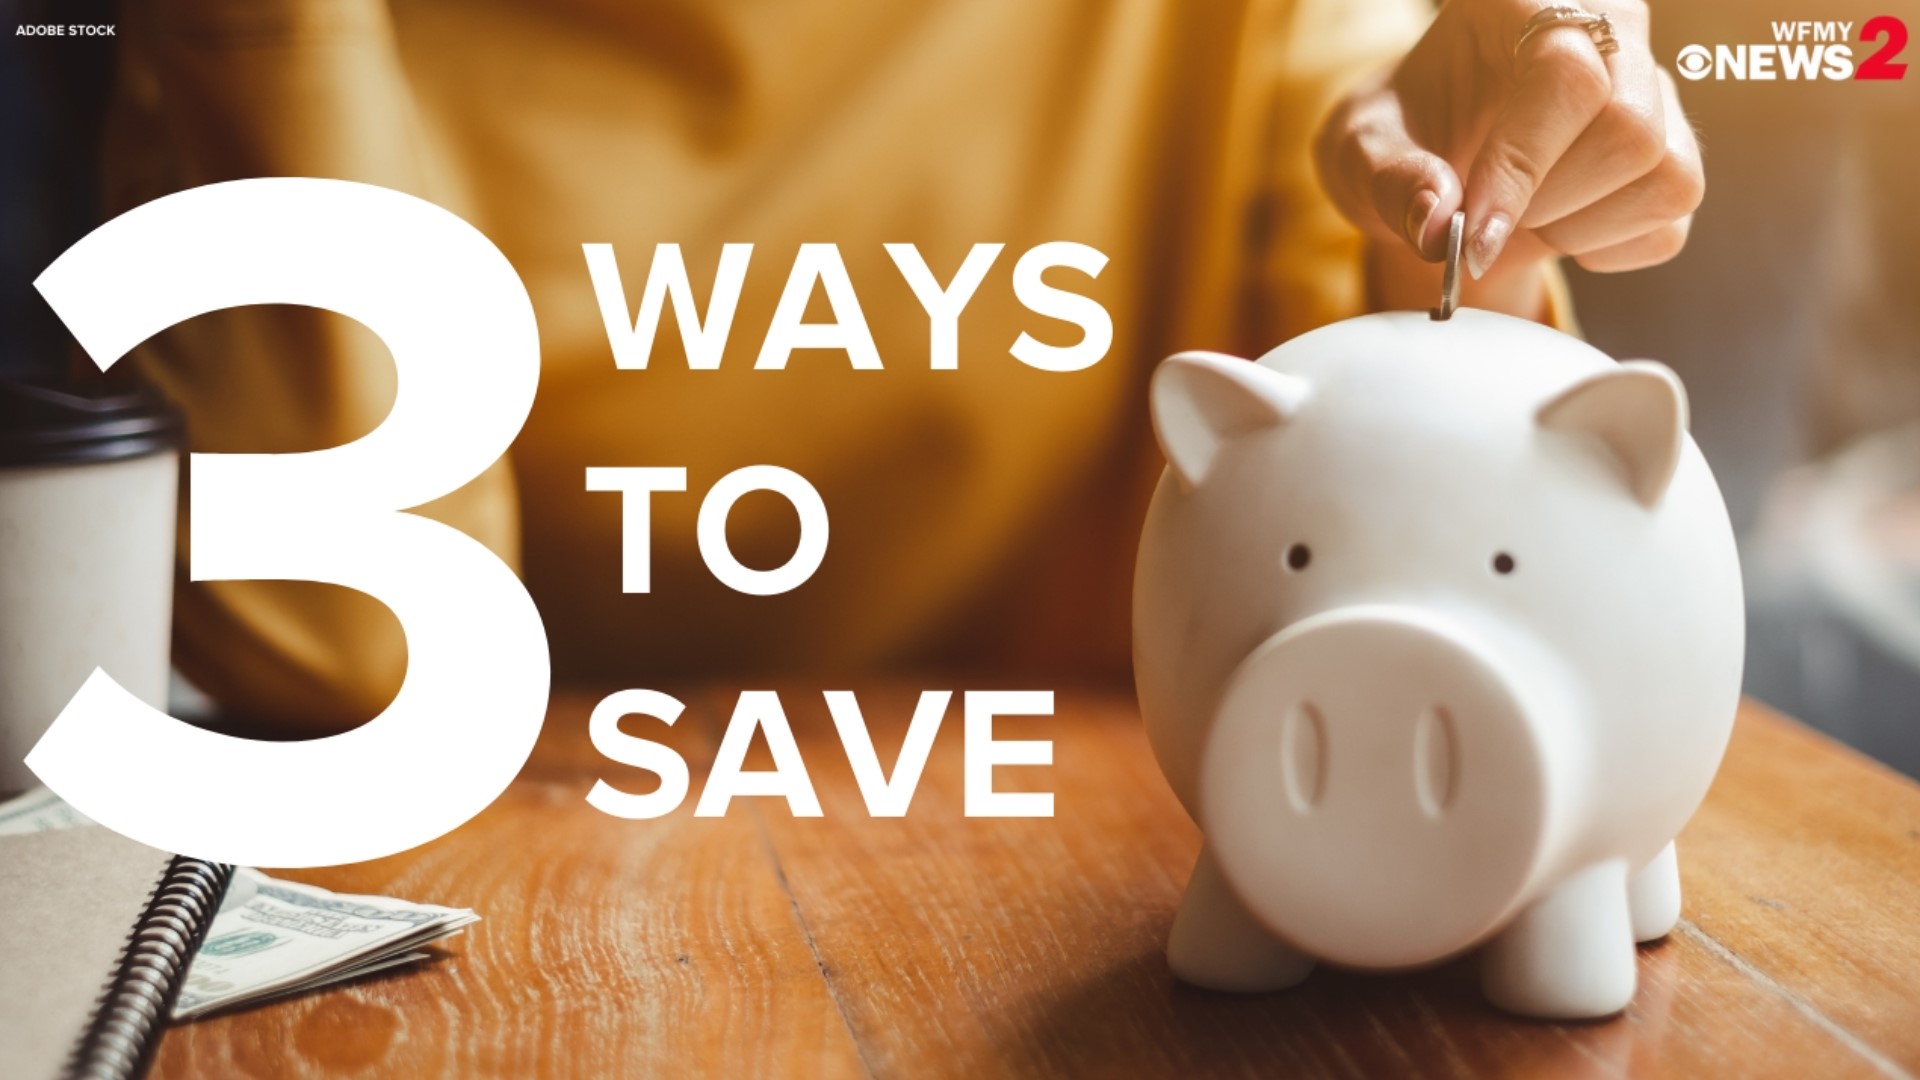 How do you reign in your spending and expand your savings when everything costs more? Check out these three ways to save.